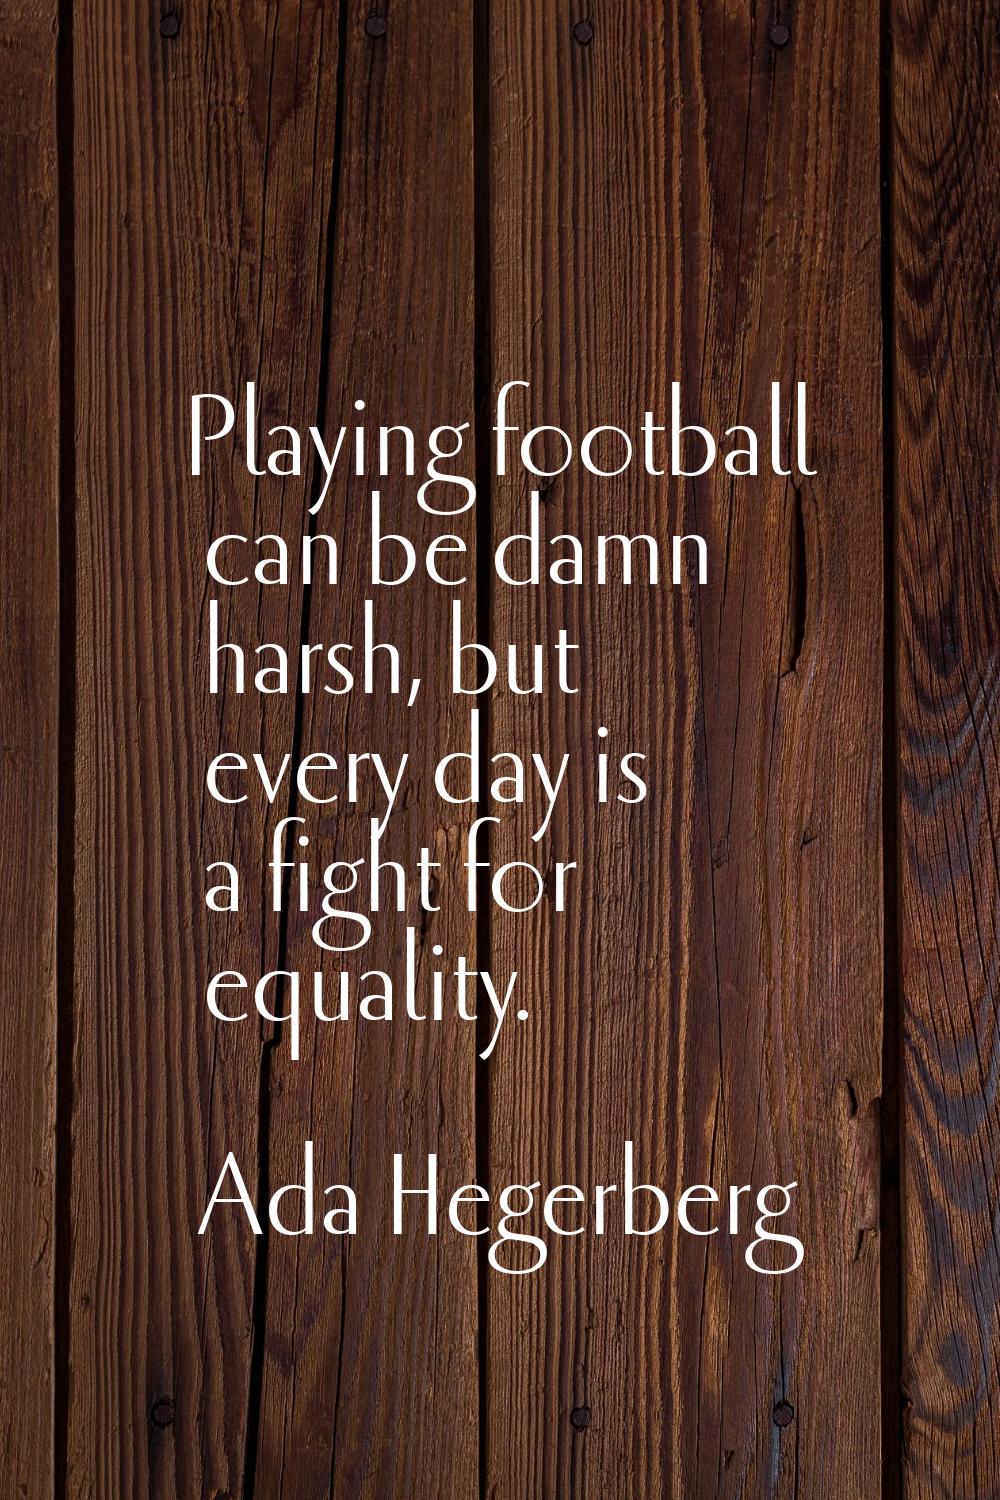 Playing football can be damn harsh, but every day is a fight for equality.